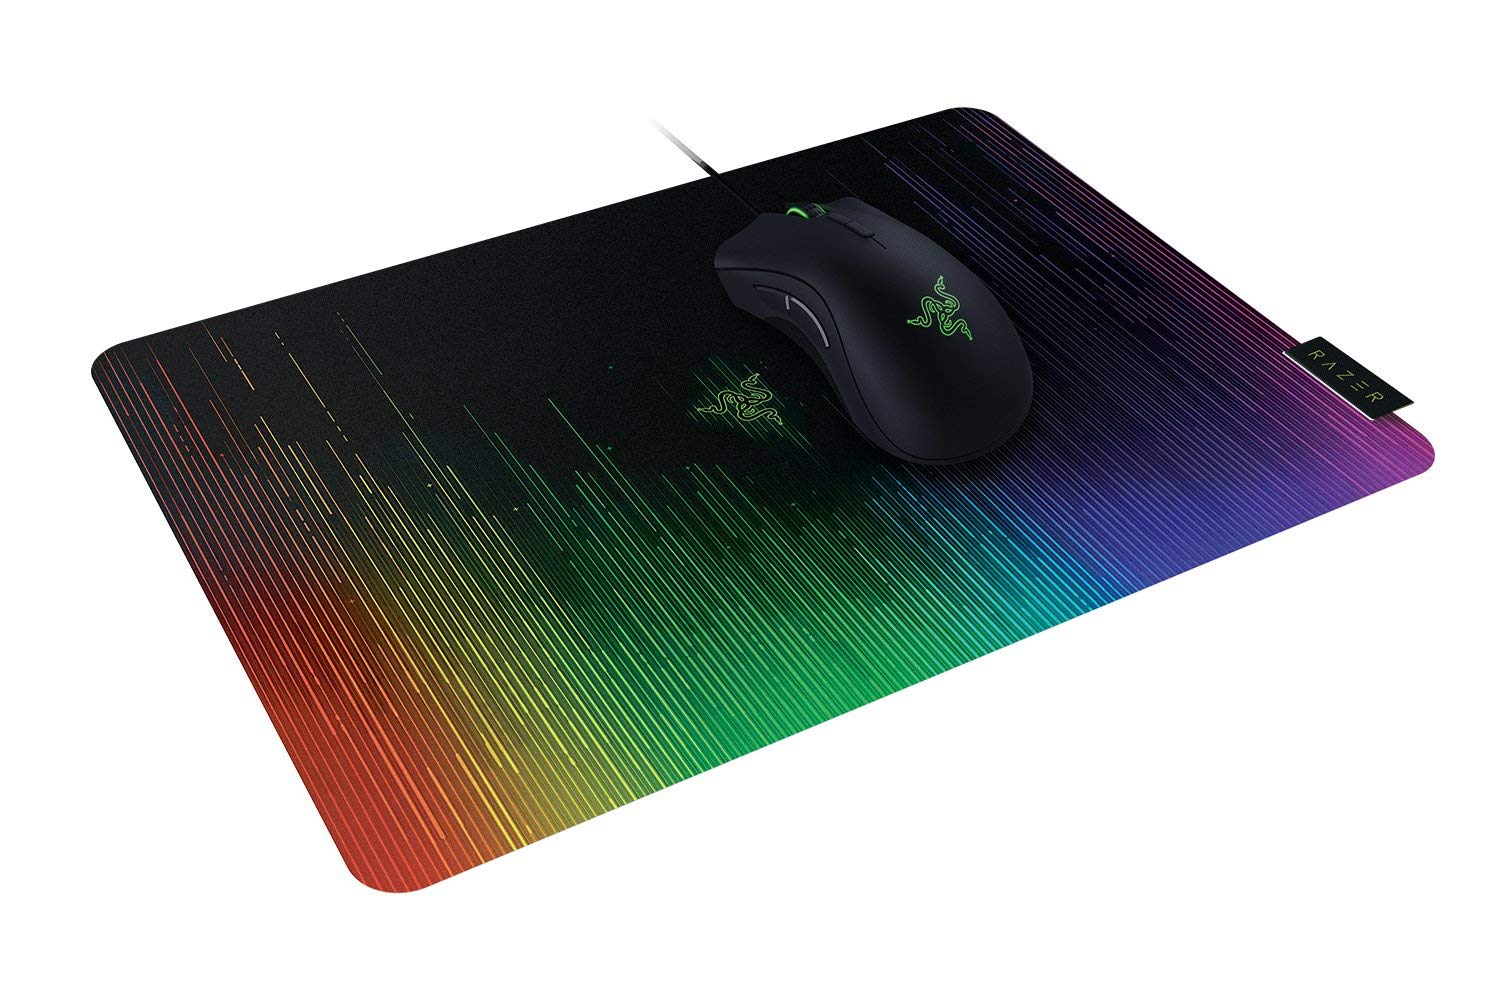 Razer Sphex V2 Ultra-Thin Form Factor - Optimized Gaming Surface - Polycarbonate Finish - Gaming Mouse Mat - image 2 of 10